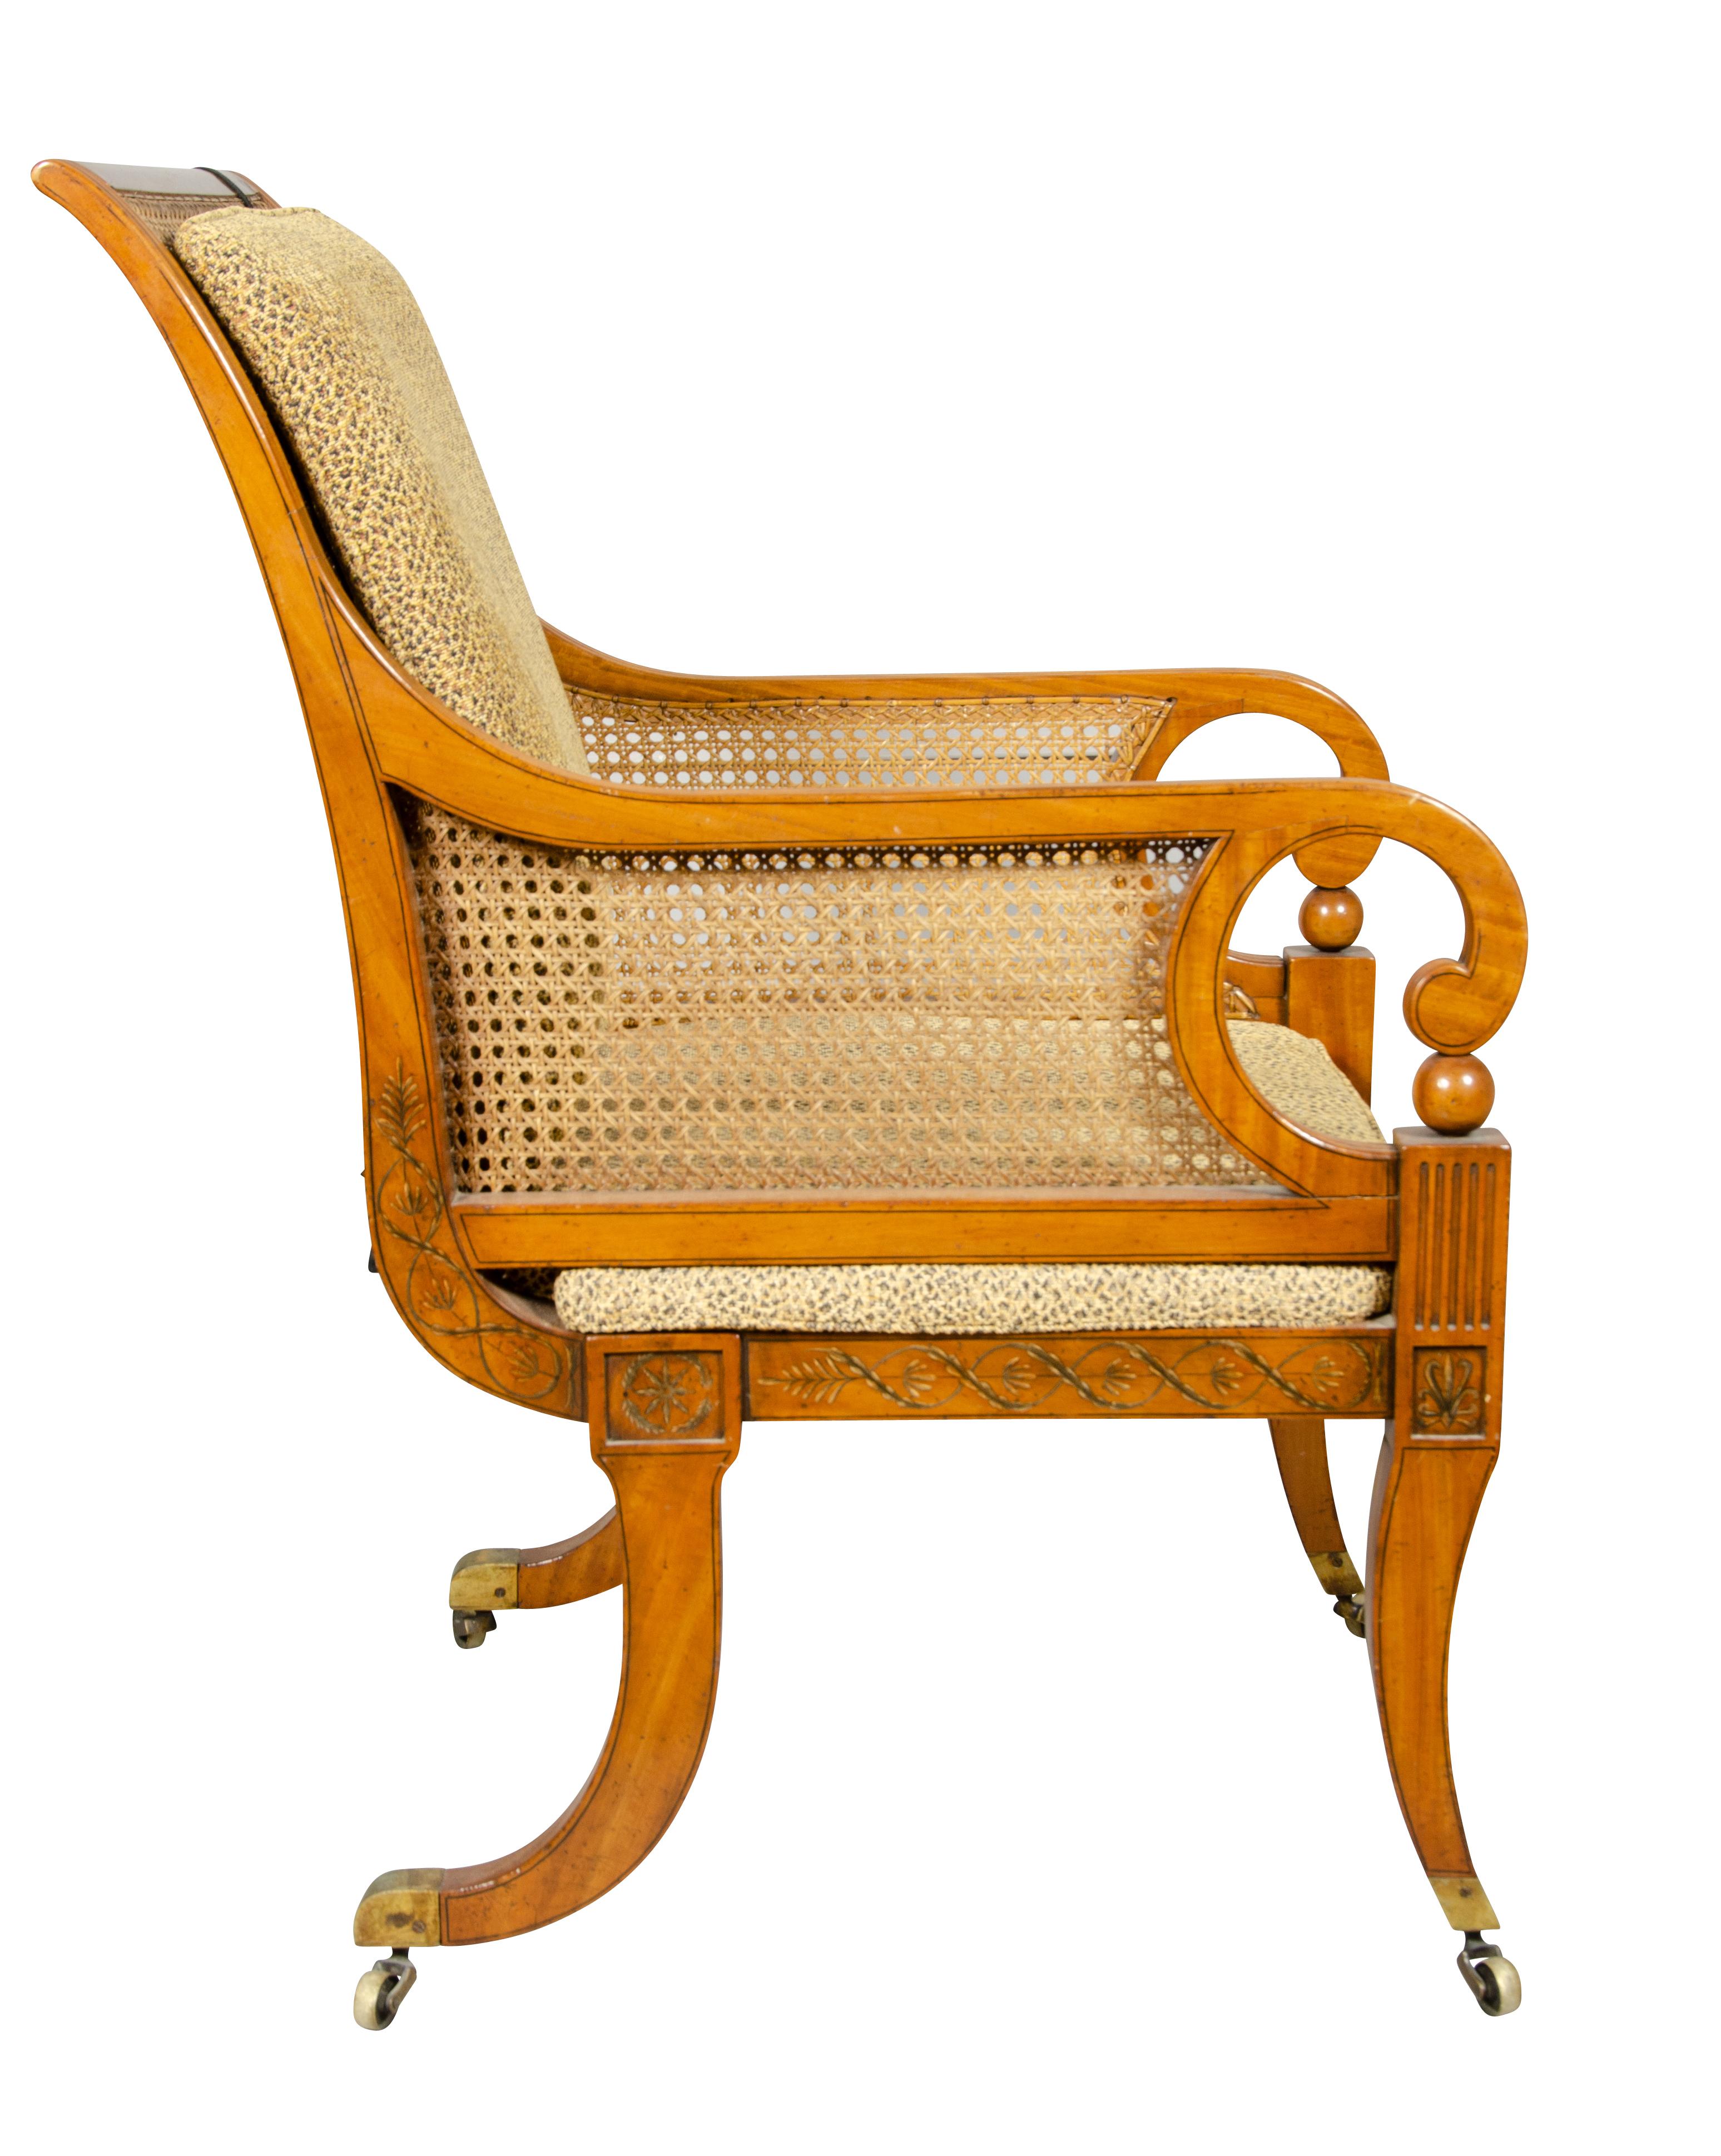 Late Regency Satinwood and Painted Armchair In Good Condition For Sale In Essex, MA